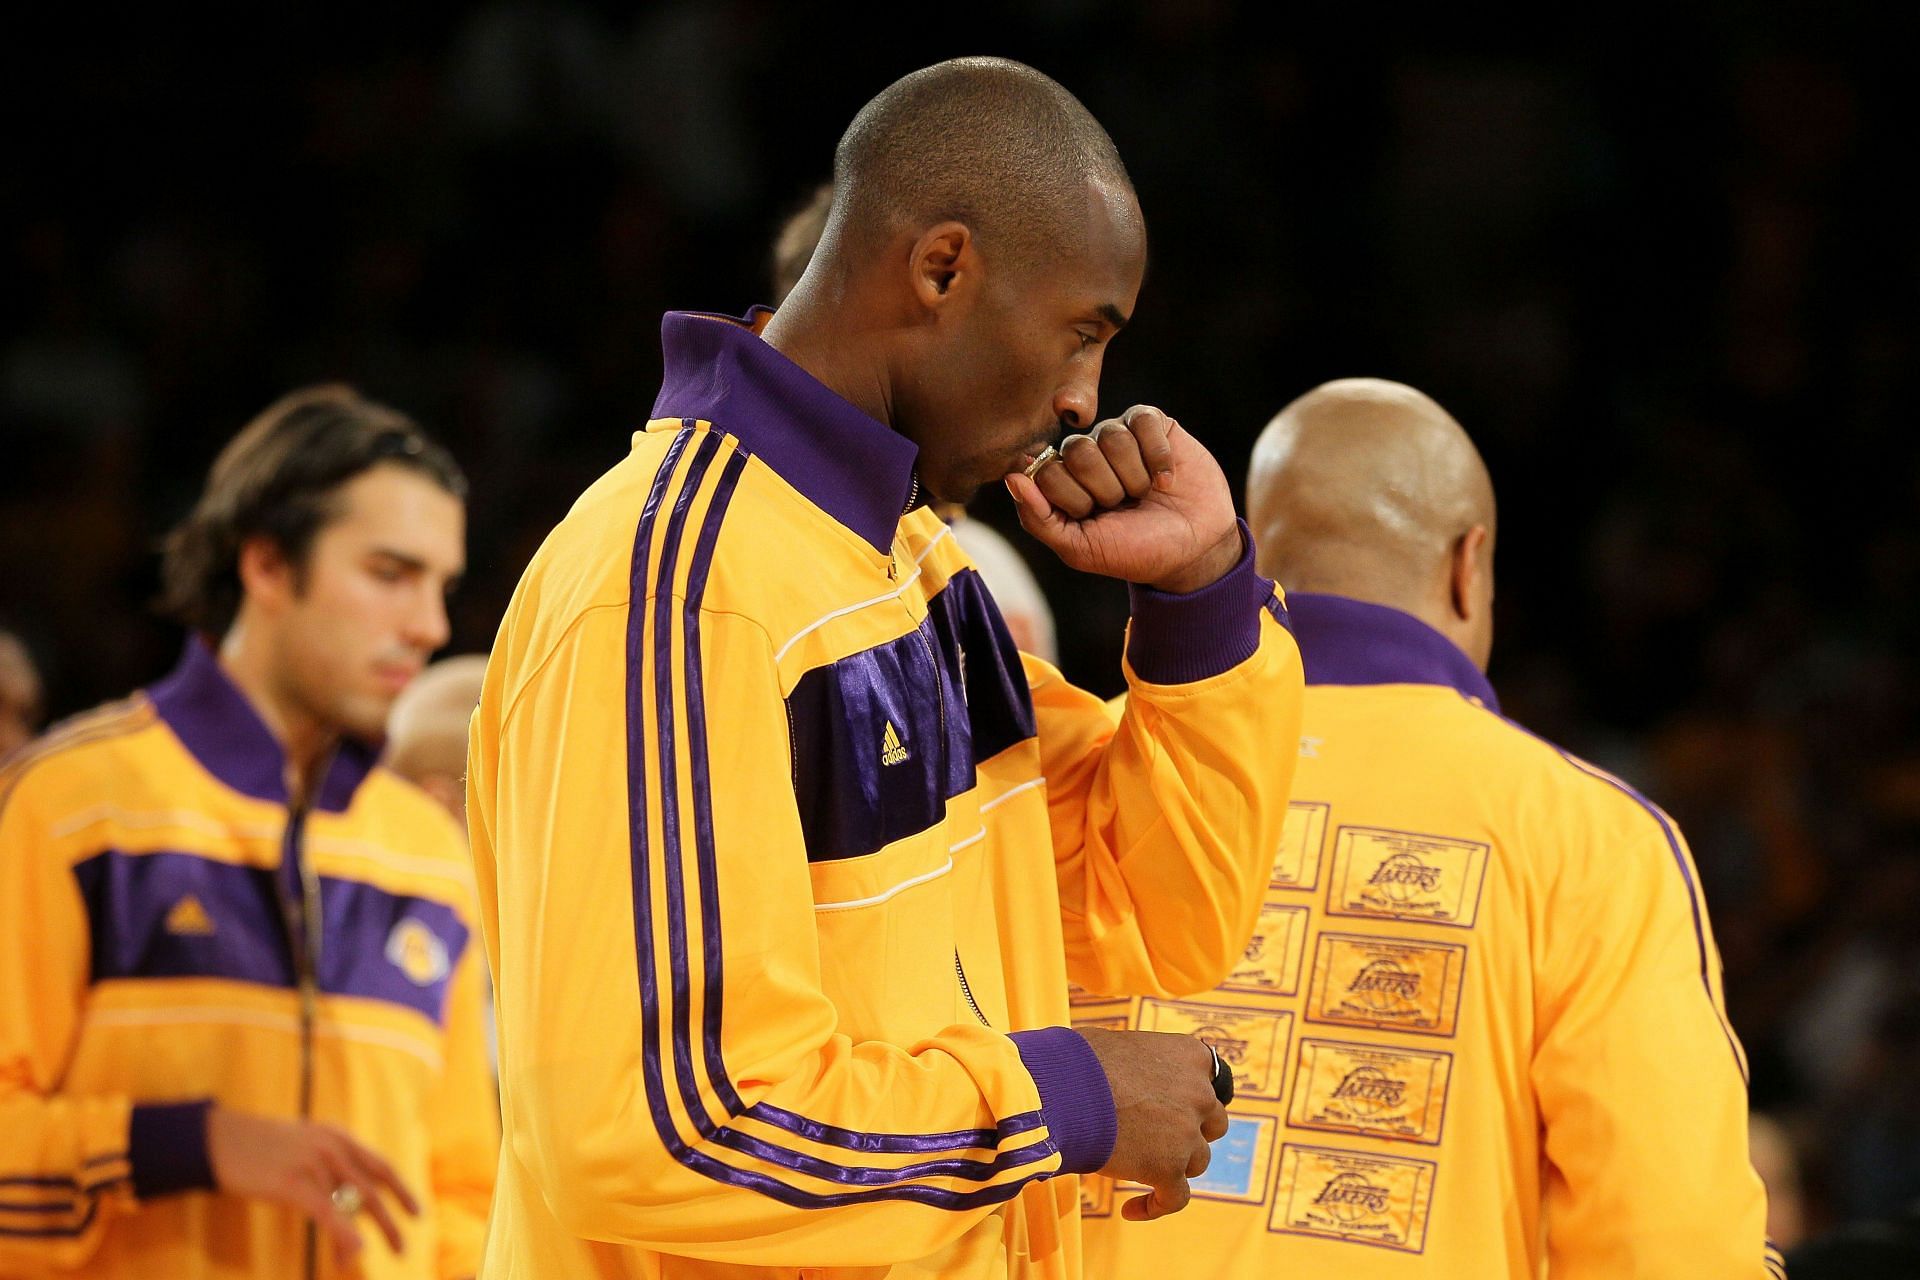 Kobe Bryant won five NBA championships with the franchise and two Finals MVPs.